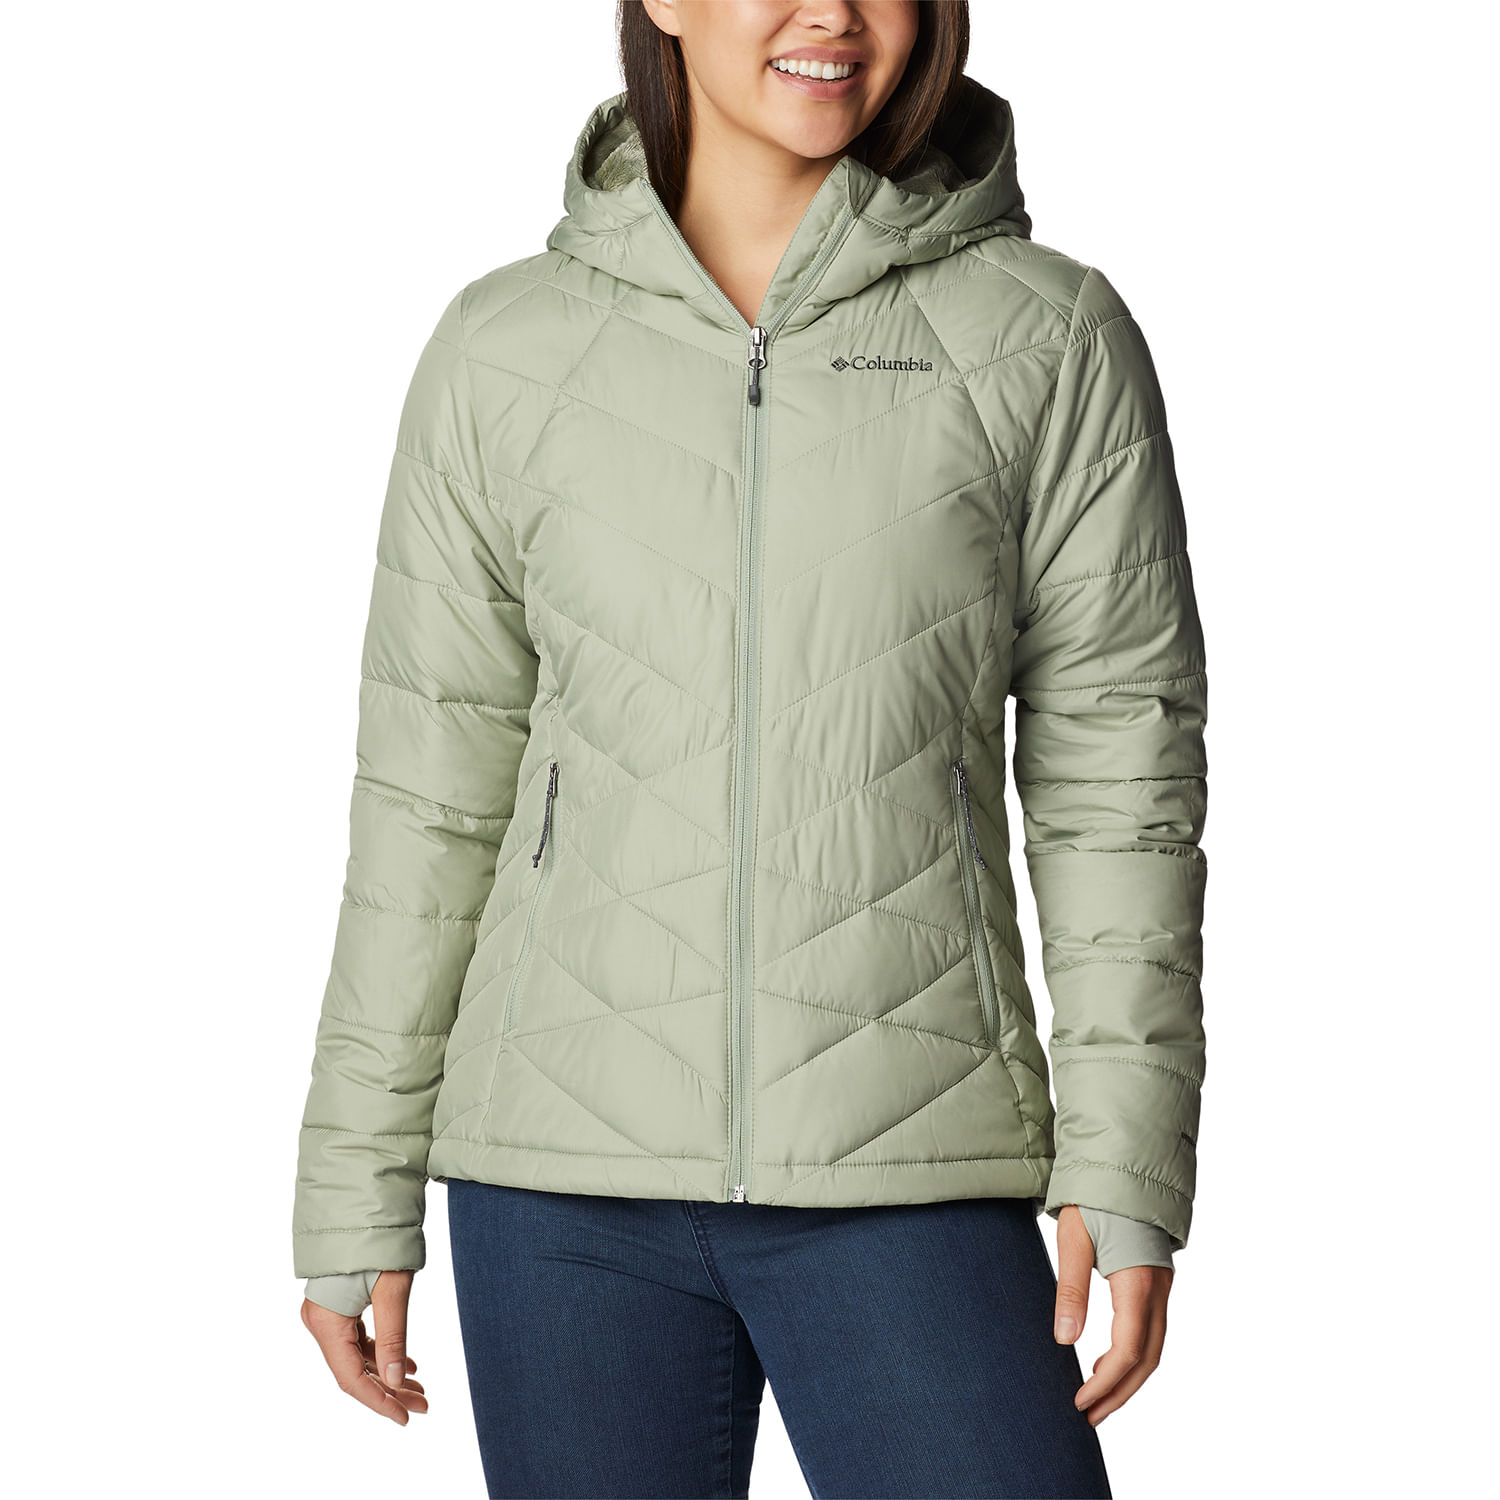 Parka Mujer Heavenly Hdd Beige Columbia